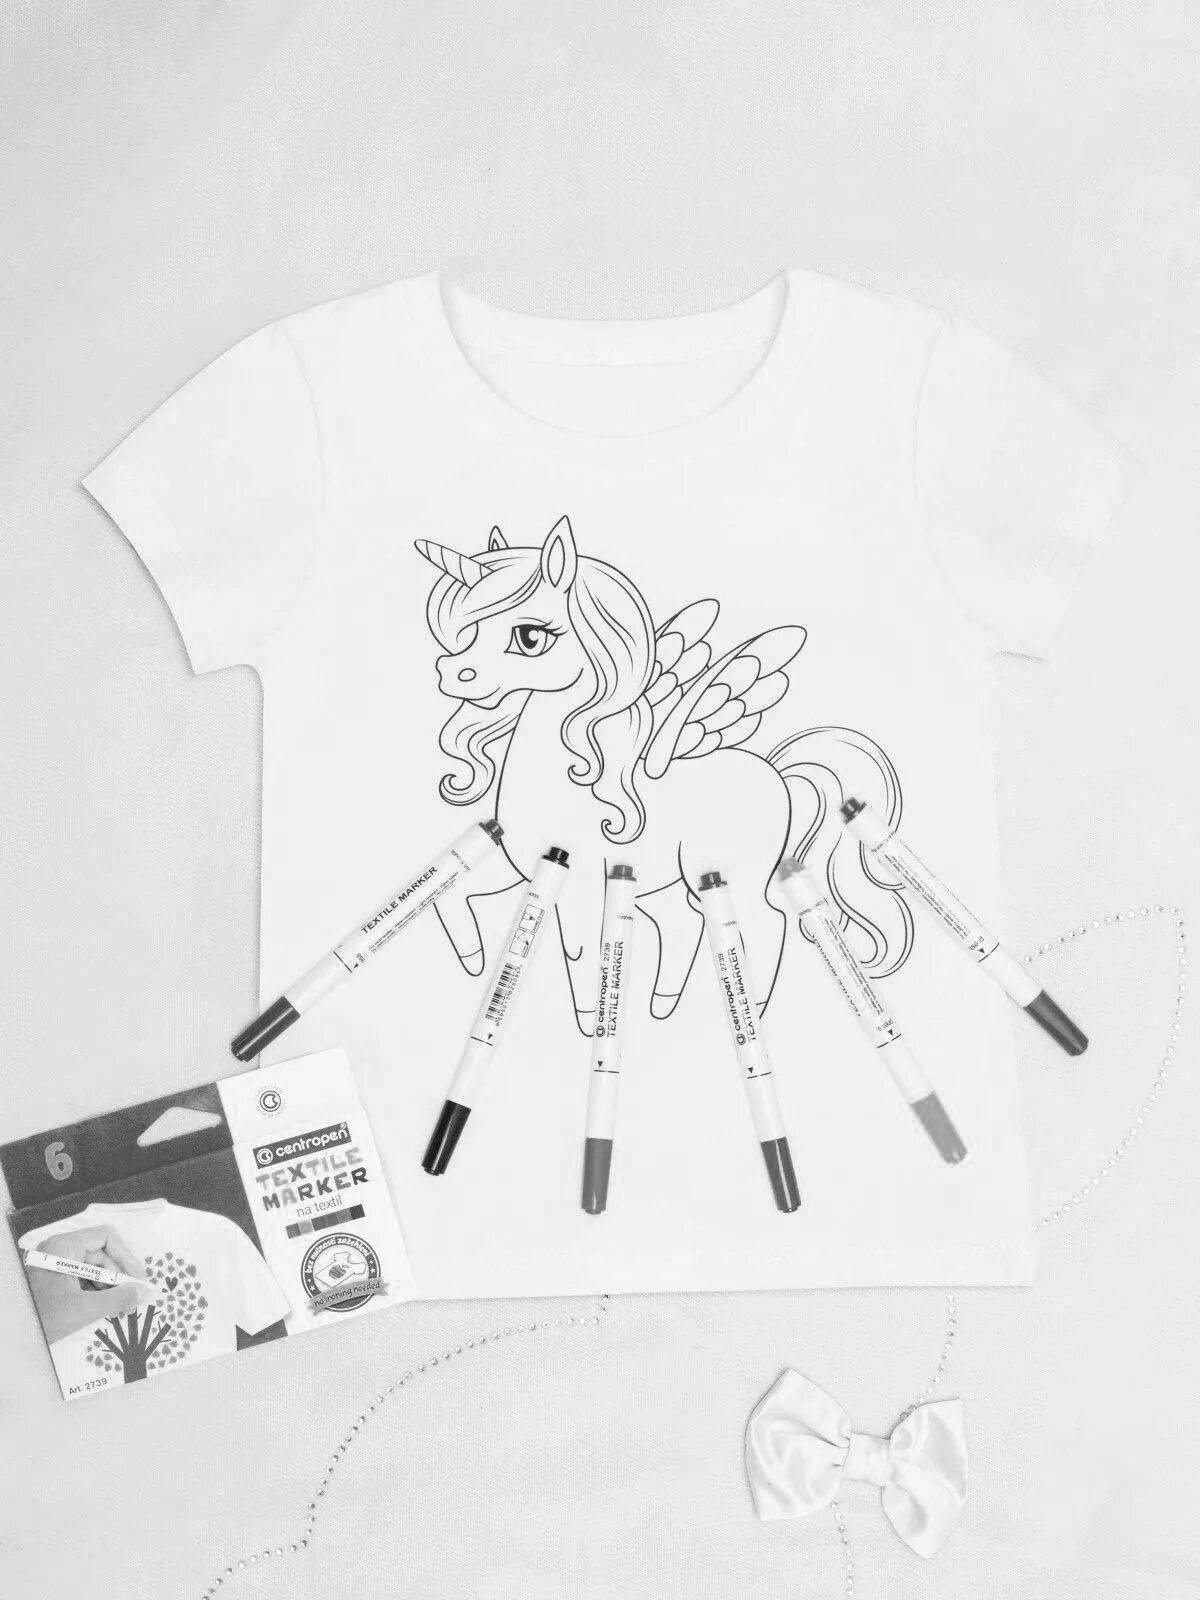 Coloring for an energetic T-shirt with felt-tip pens